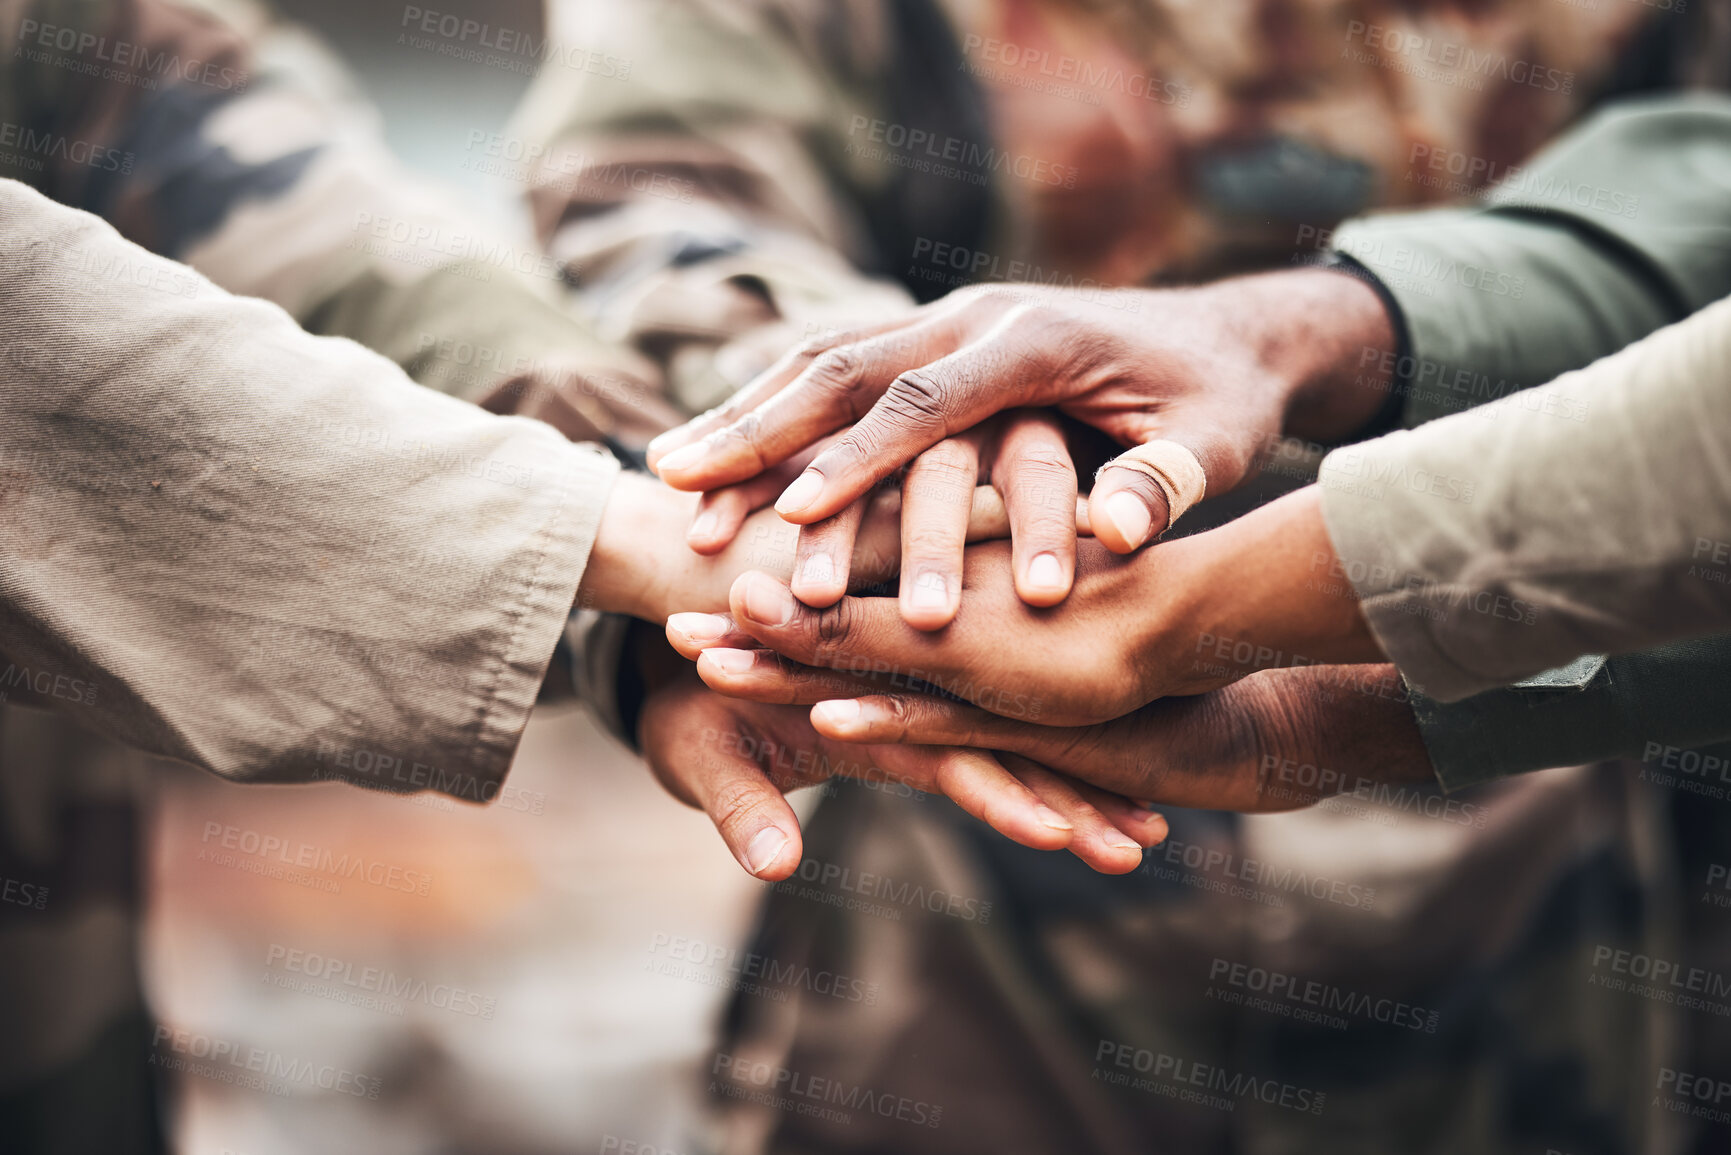 Buy stock photo Hands, team and solidarity with people and collaboration, mission and paintball game strategy with support. Teamwork, motivation and community with trust, respect with goals and ready for battle